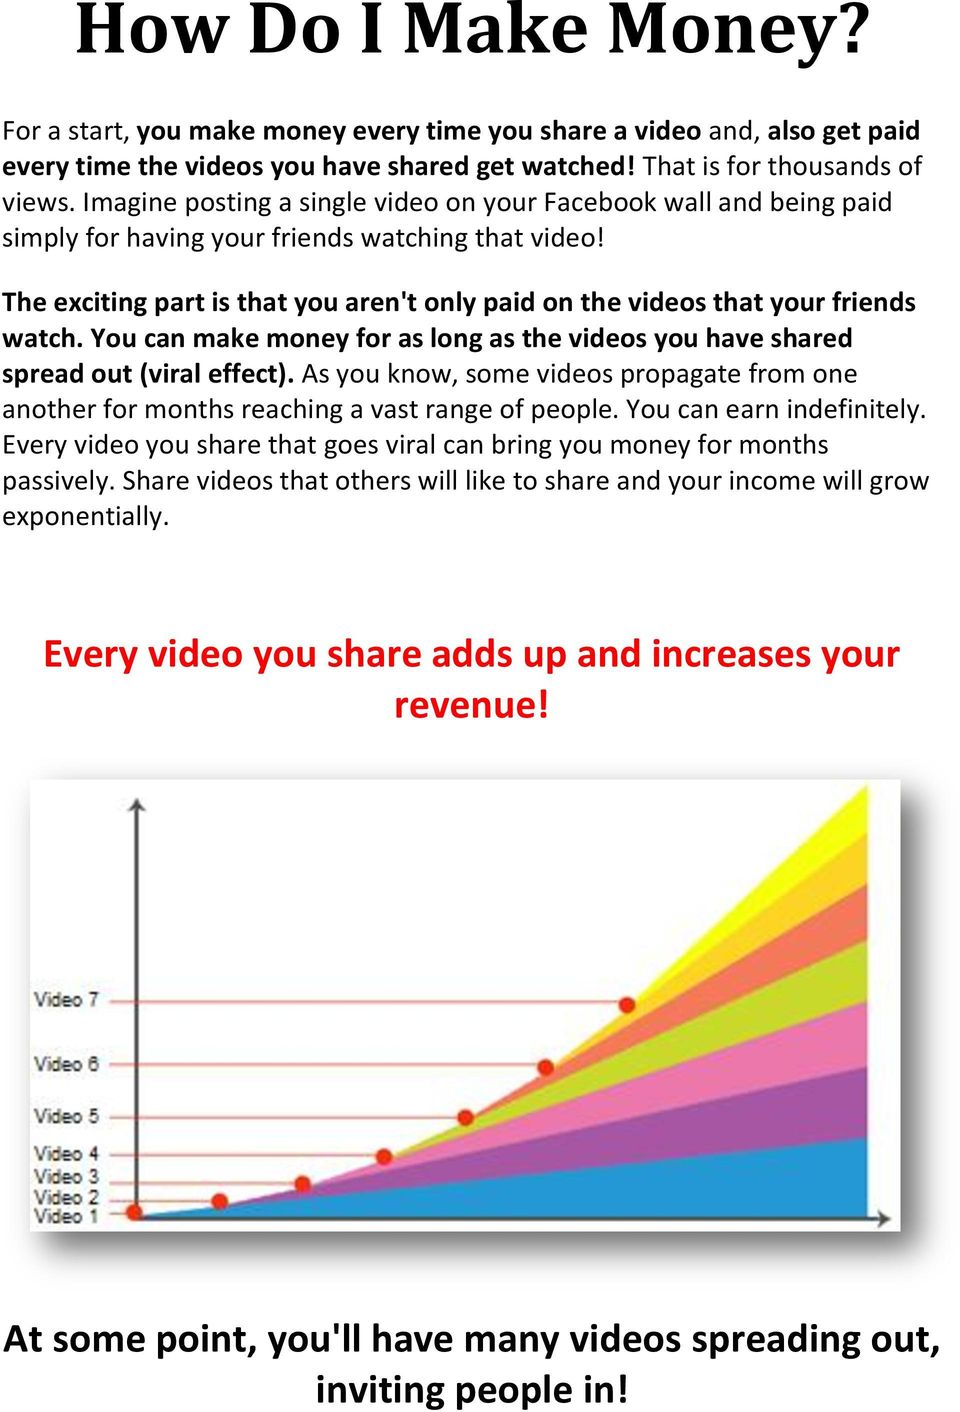 The exciting part is that you aren't only paid on the videos that your friends watch. You can make money for as long as the videos you have shared spread out (viral effect).